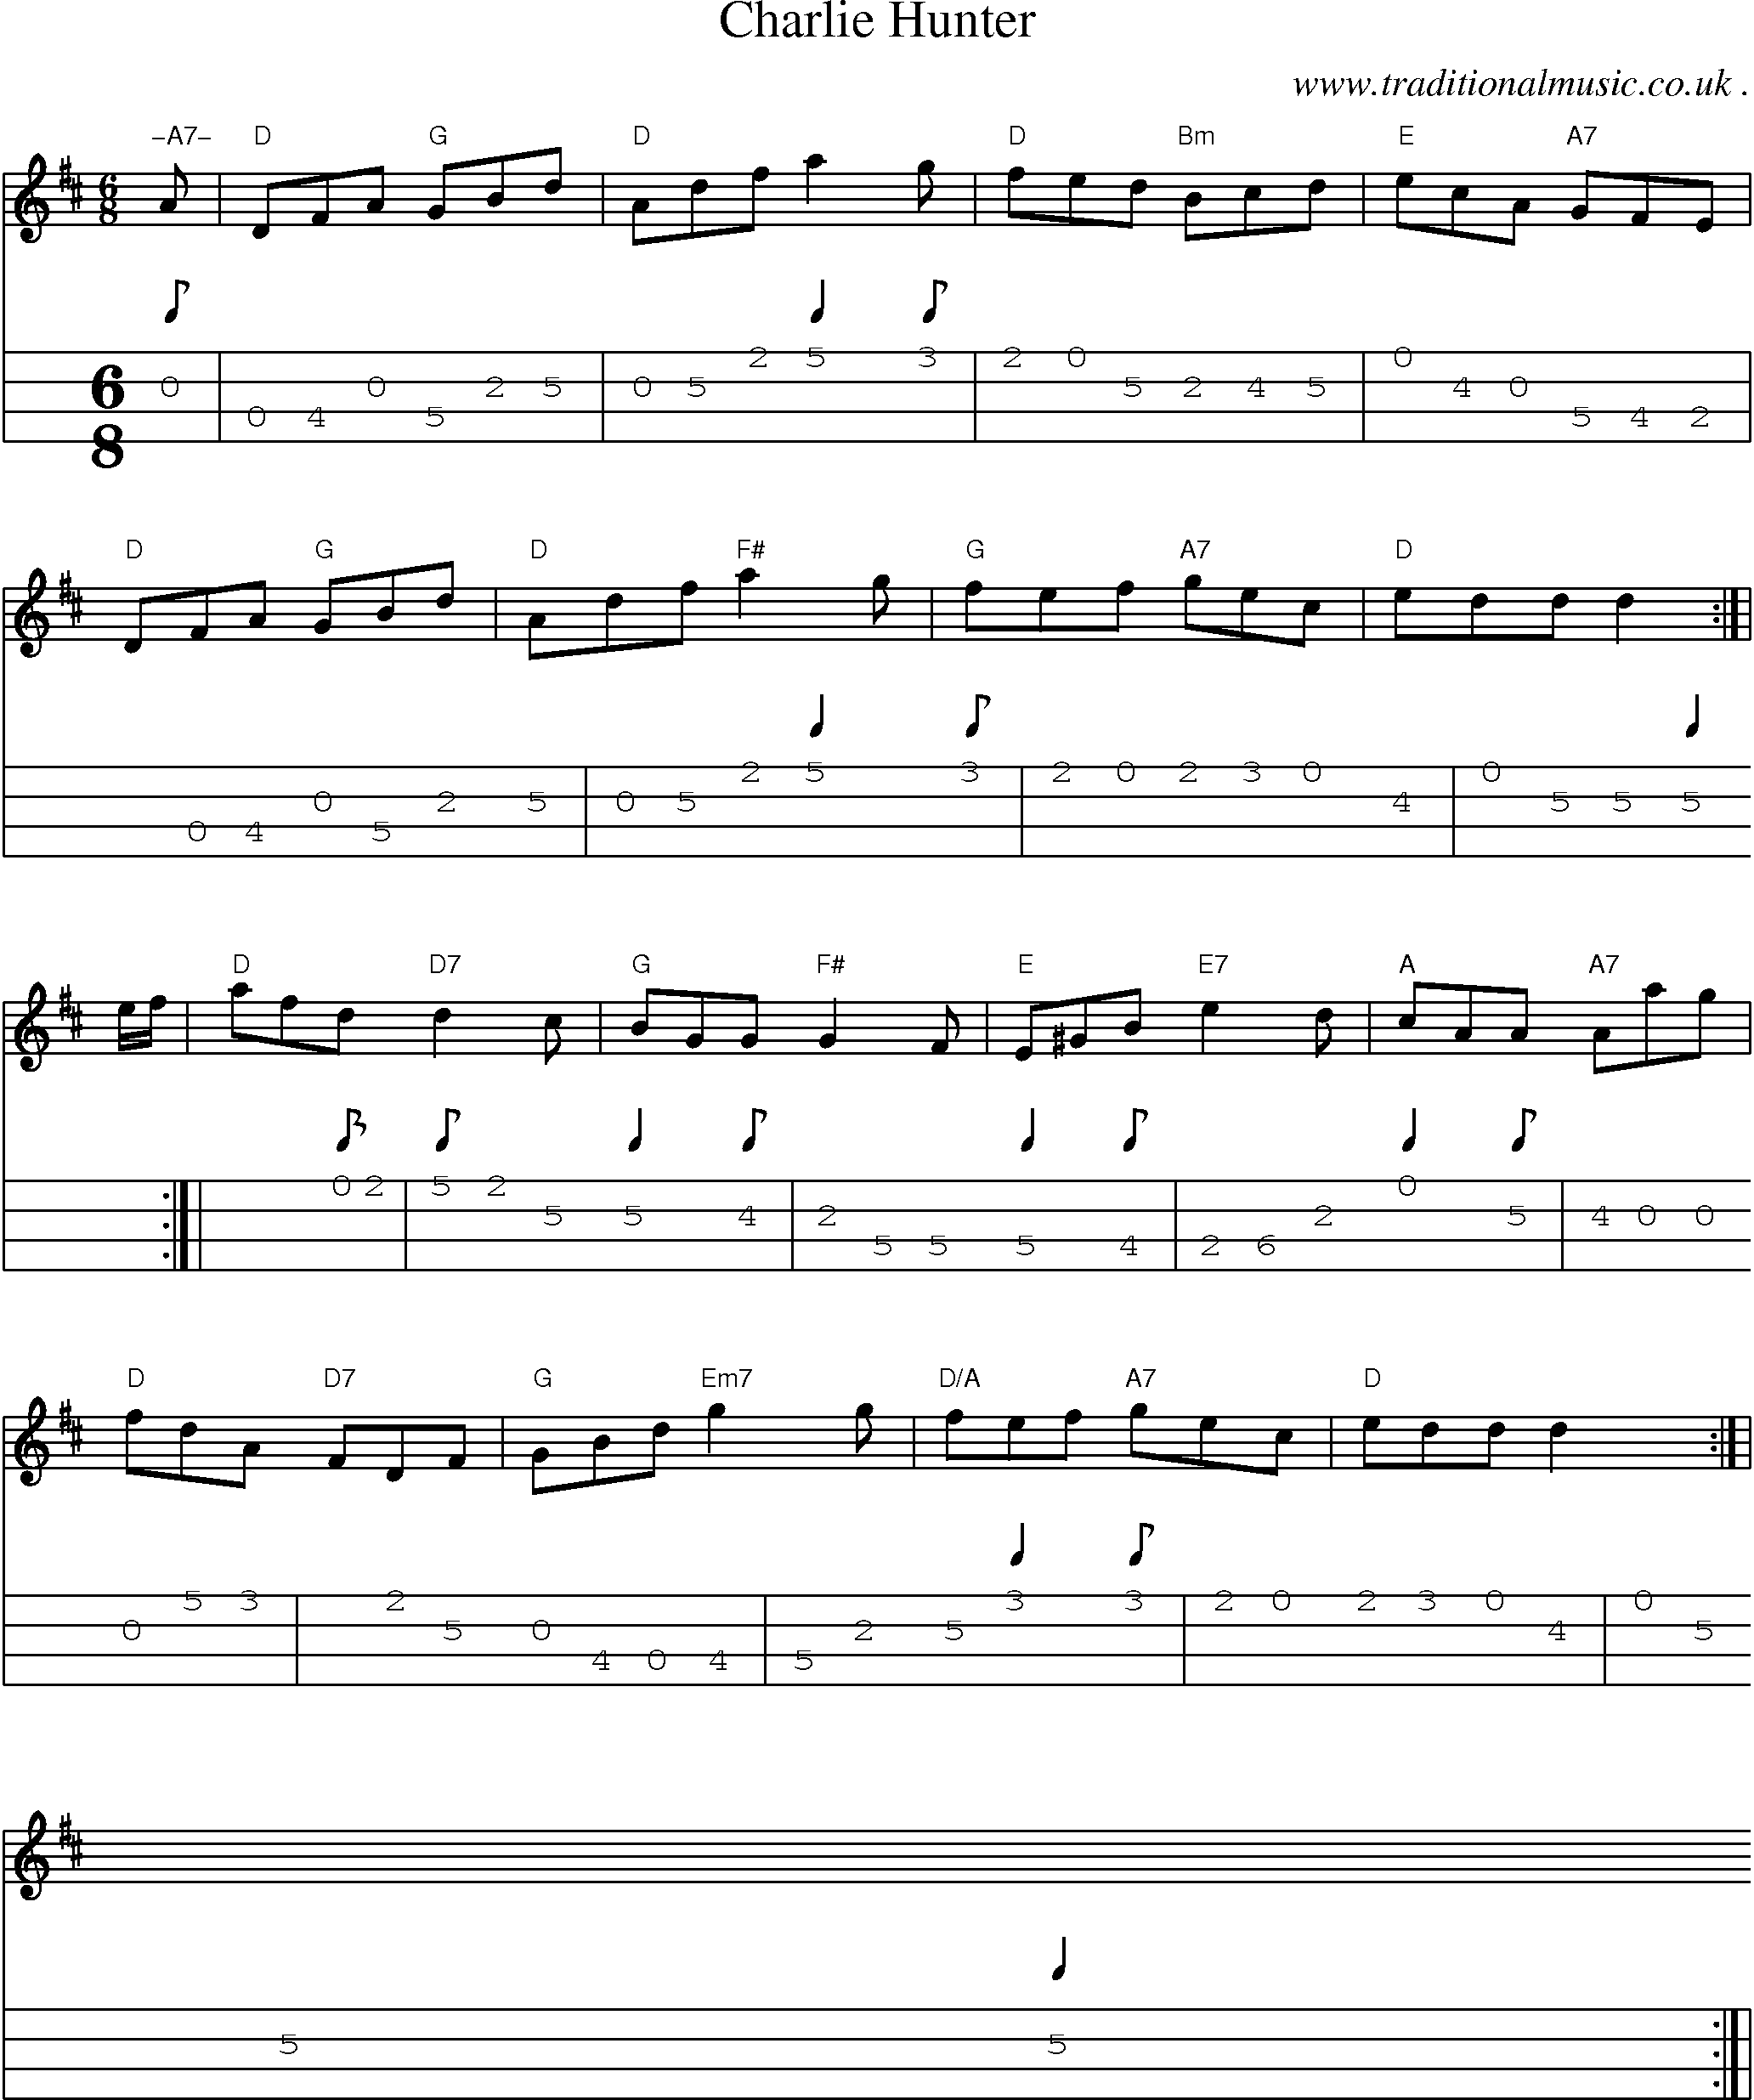 Sheet-music  score, Chords and Mandolin Tabs for Charlie Hunter